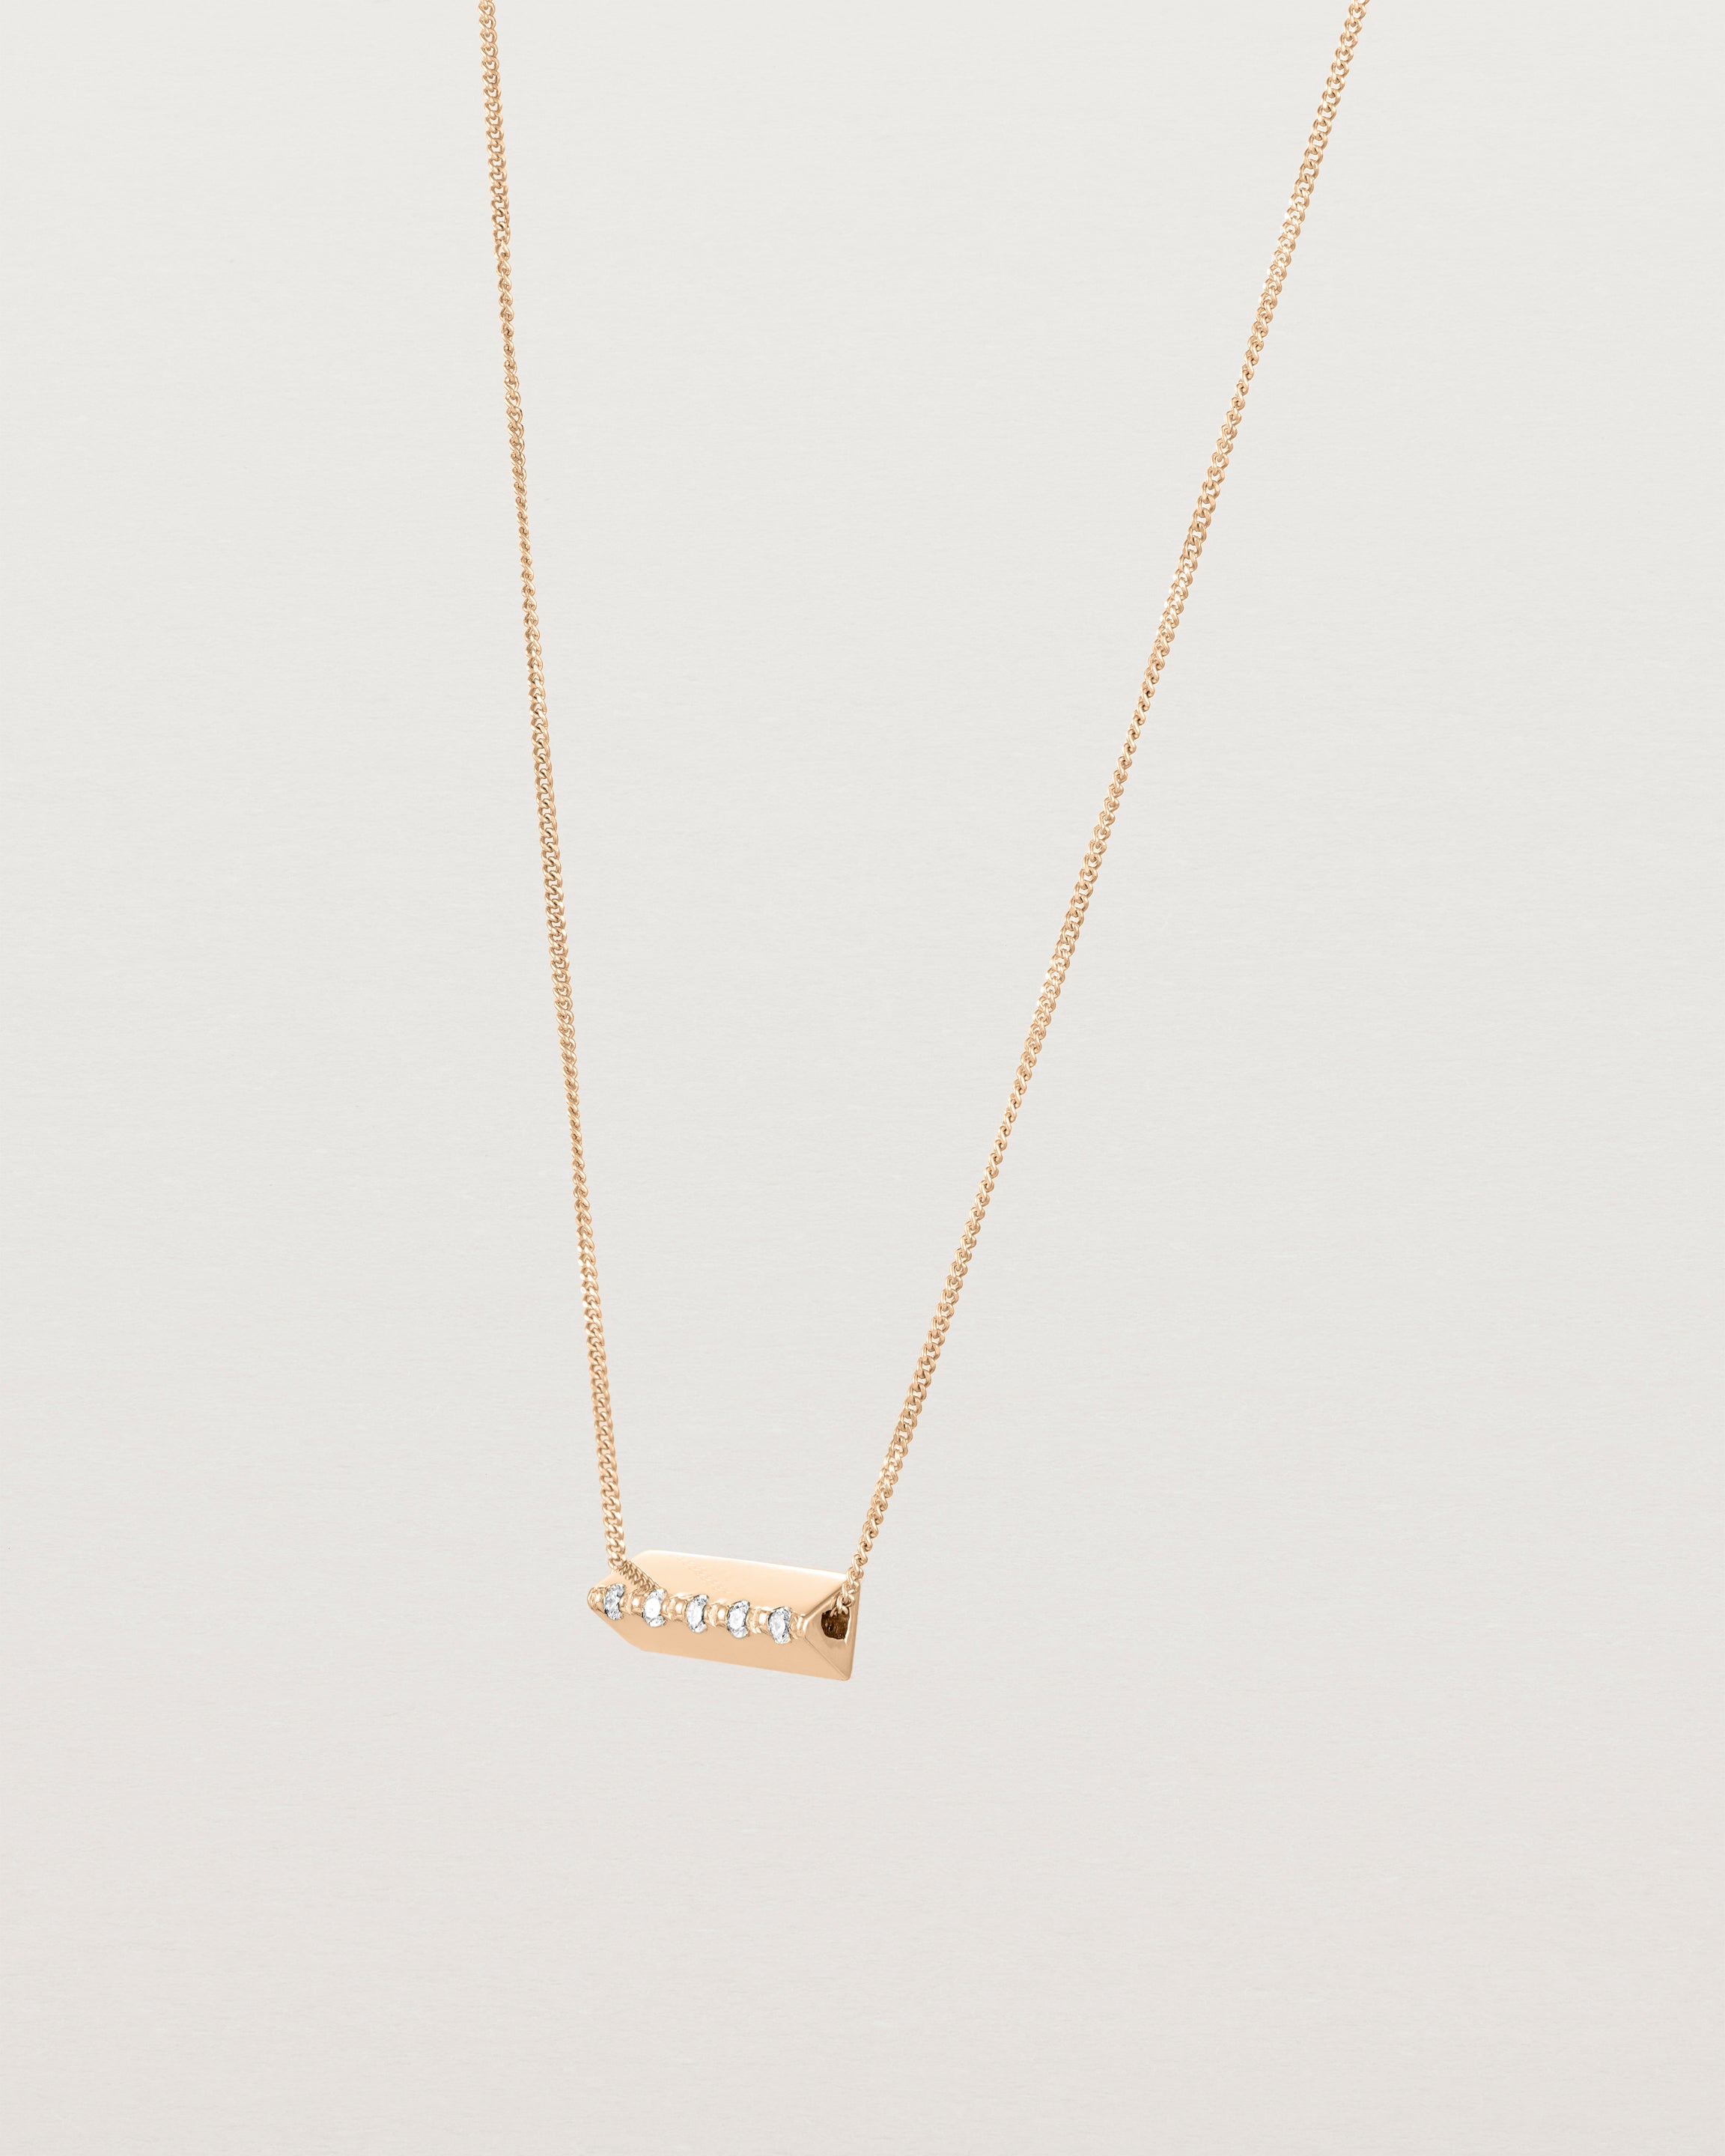 Angled view of the Cascade Knife Edge Necklace | Diamonds in rose gold.